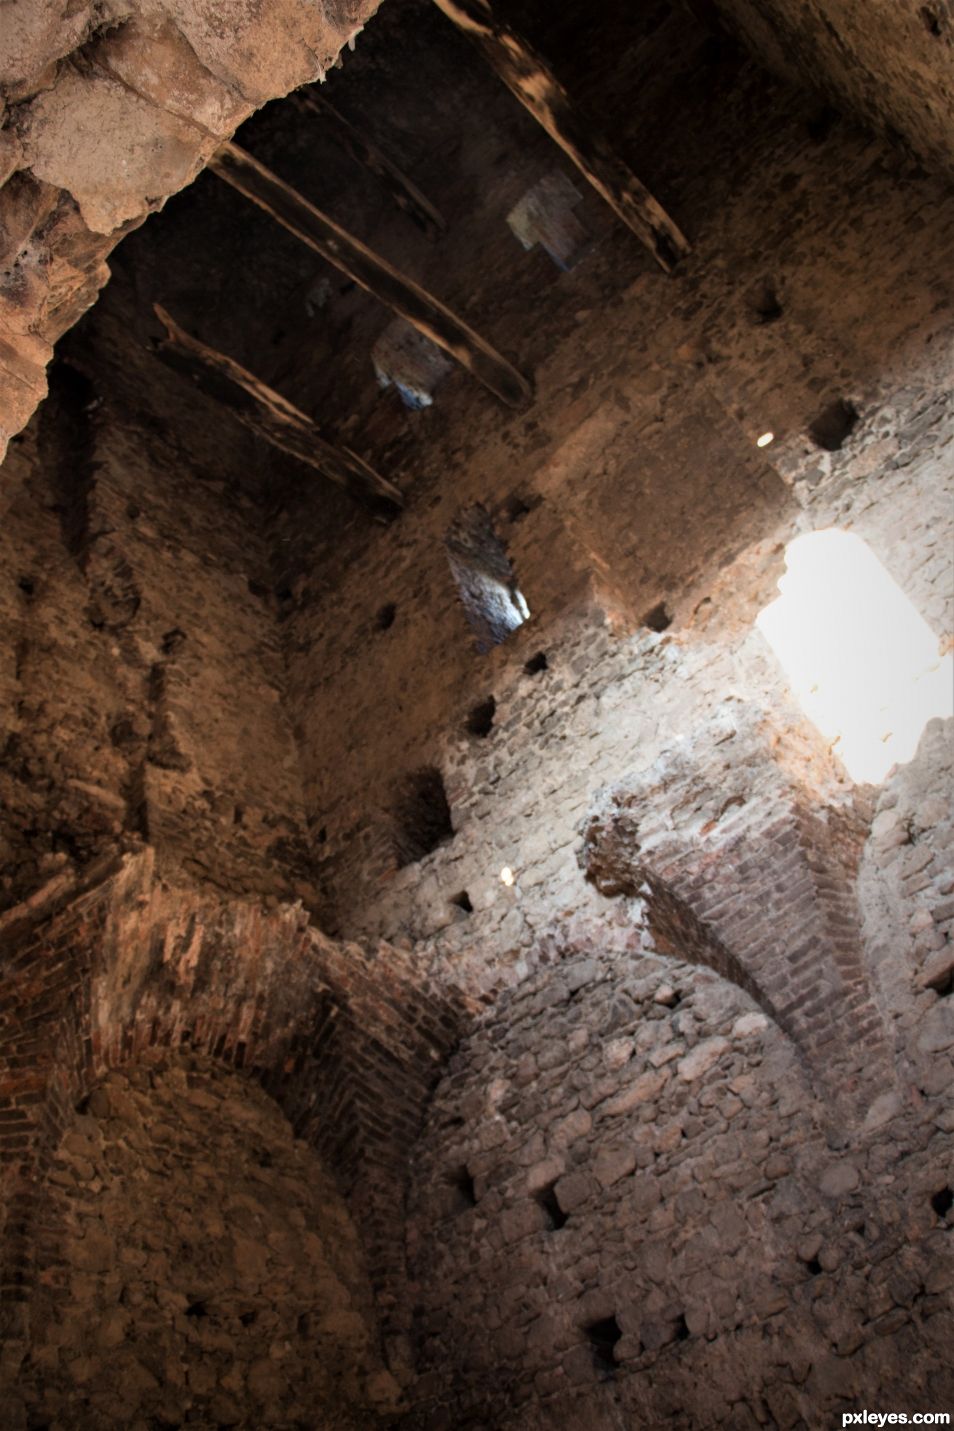 inside the old tower